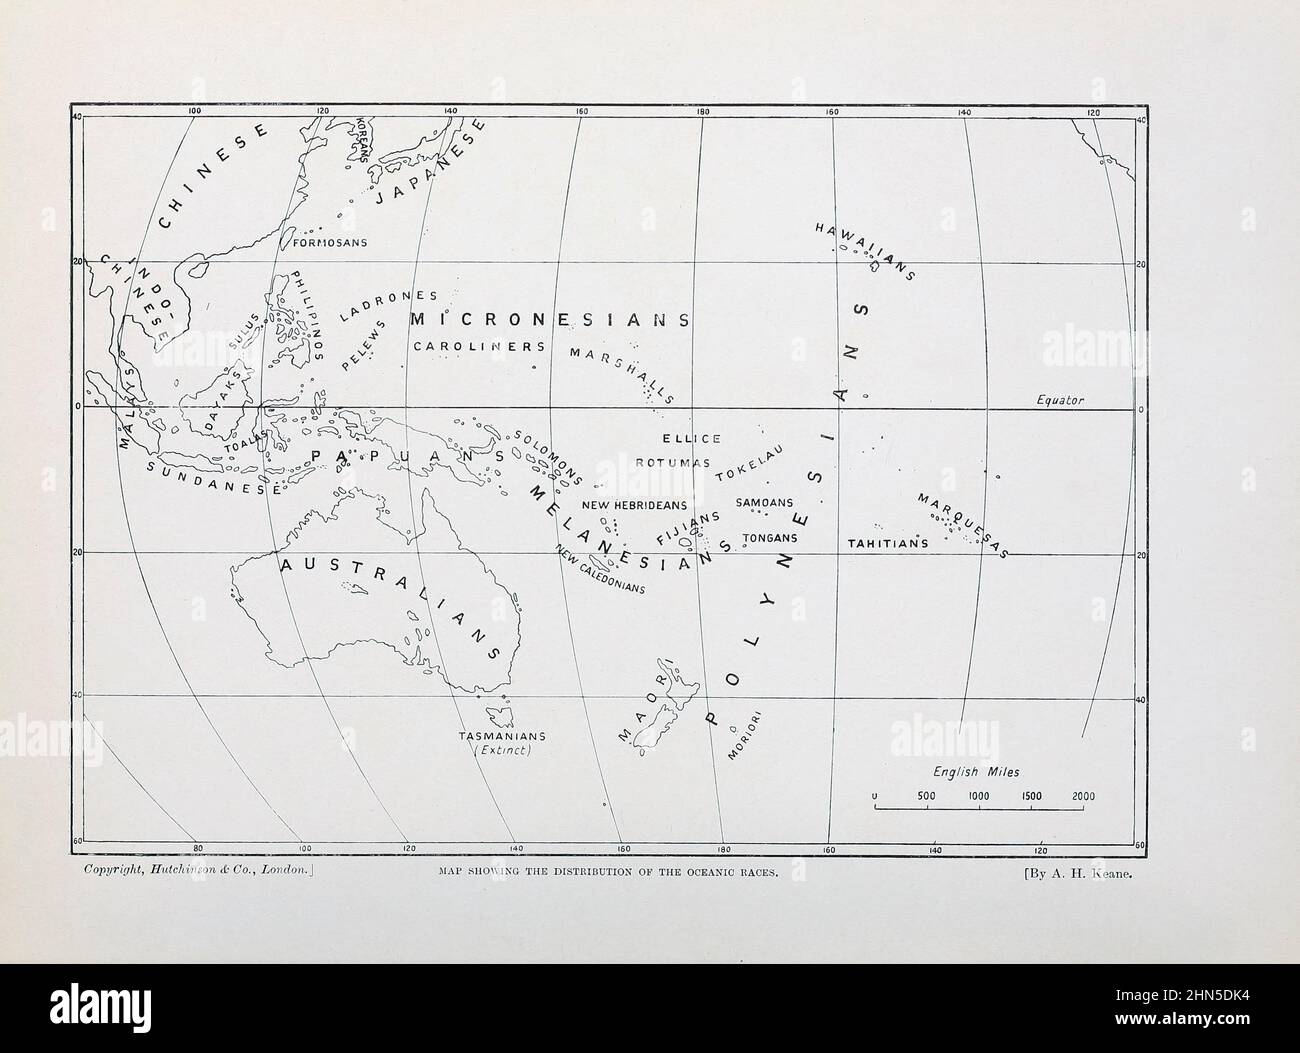 Map showing the distribution of races of the Pacific Ocean from The living races of mankind : a popular illustrated account of the customs, habits, pursuits, feasts & ceremonies of the races of mankind throughout the world Volume 1 by Sir Harry Hamilton Johnston, Henry Neville Hutchinson, Richard Lydekker and Dr. A. H. Keane published London : Hutchinson & Co. 1902 Stock Photo